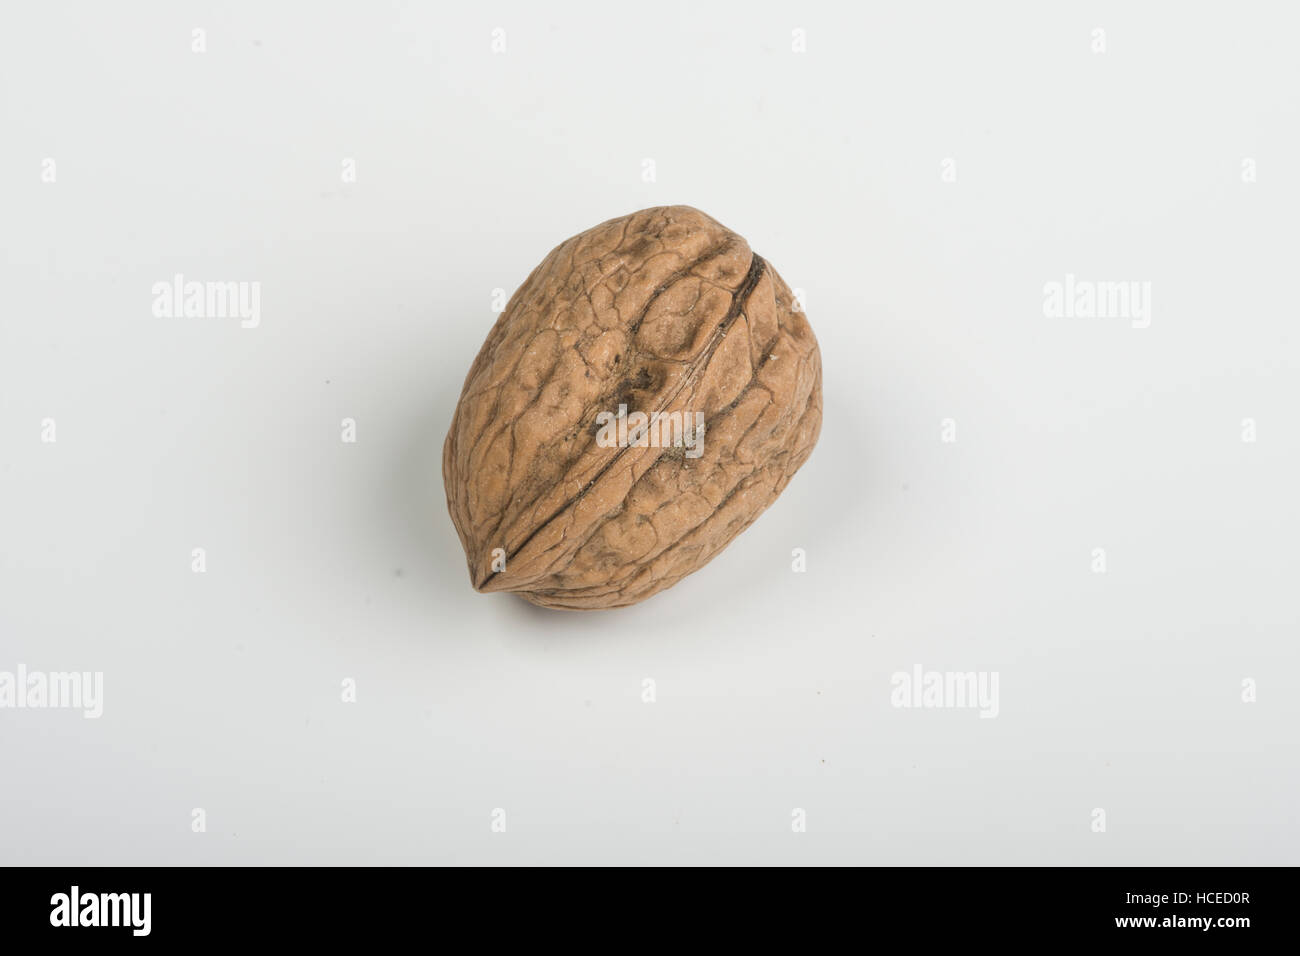 a nut on the table Stock Photo